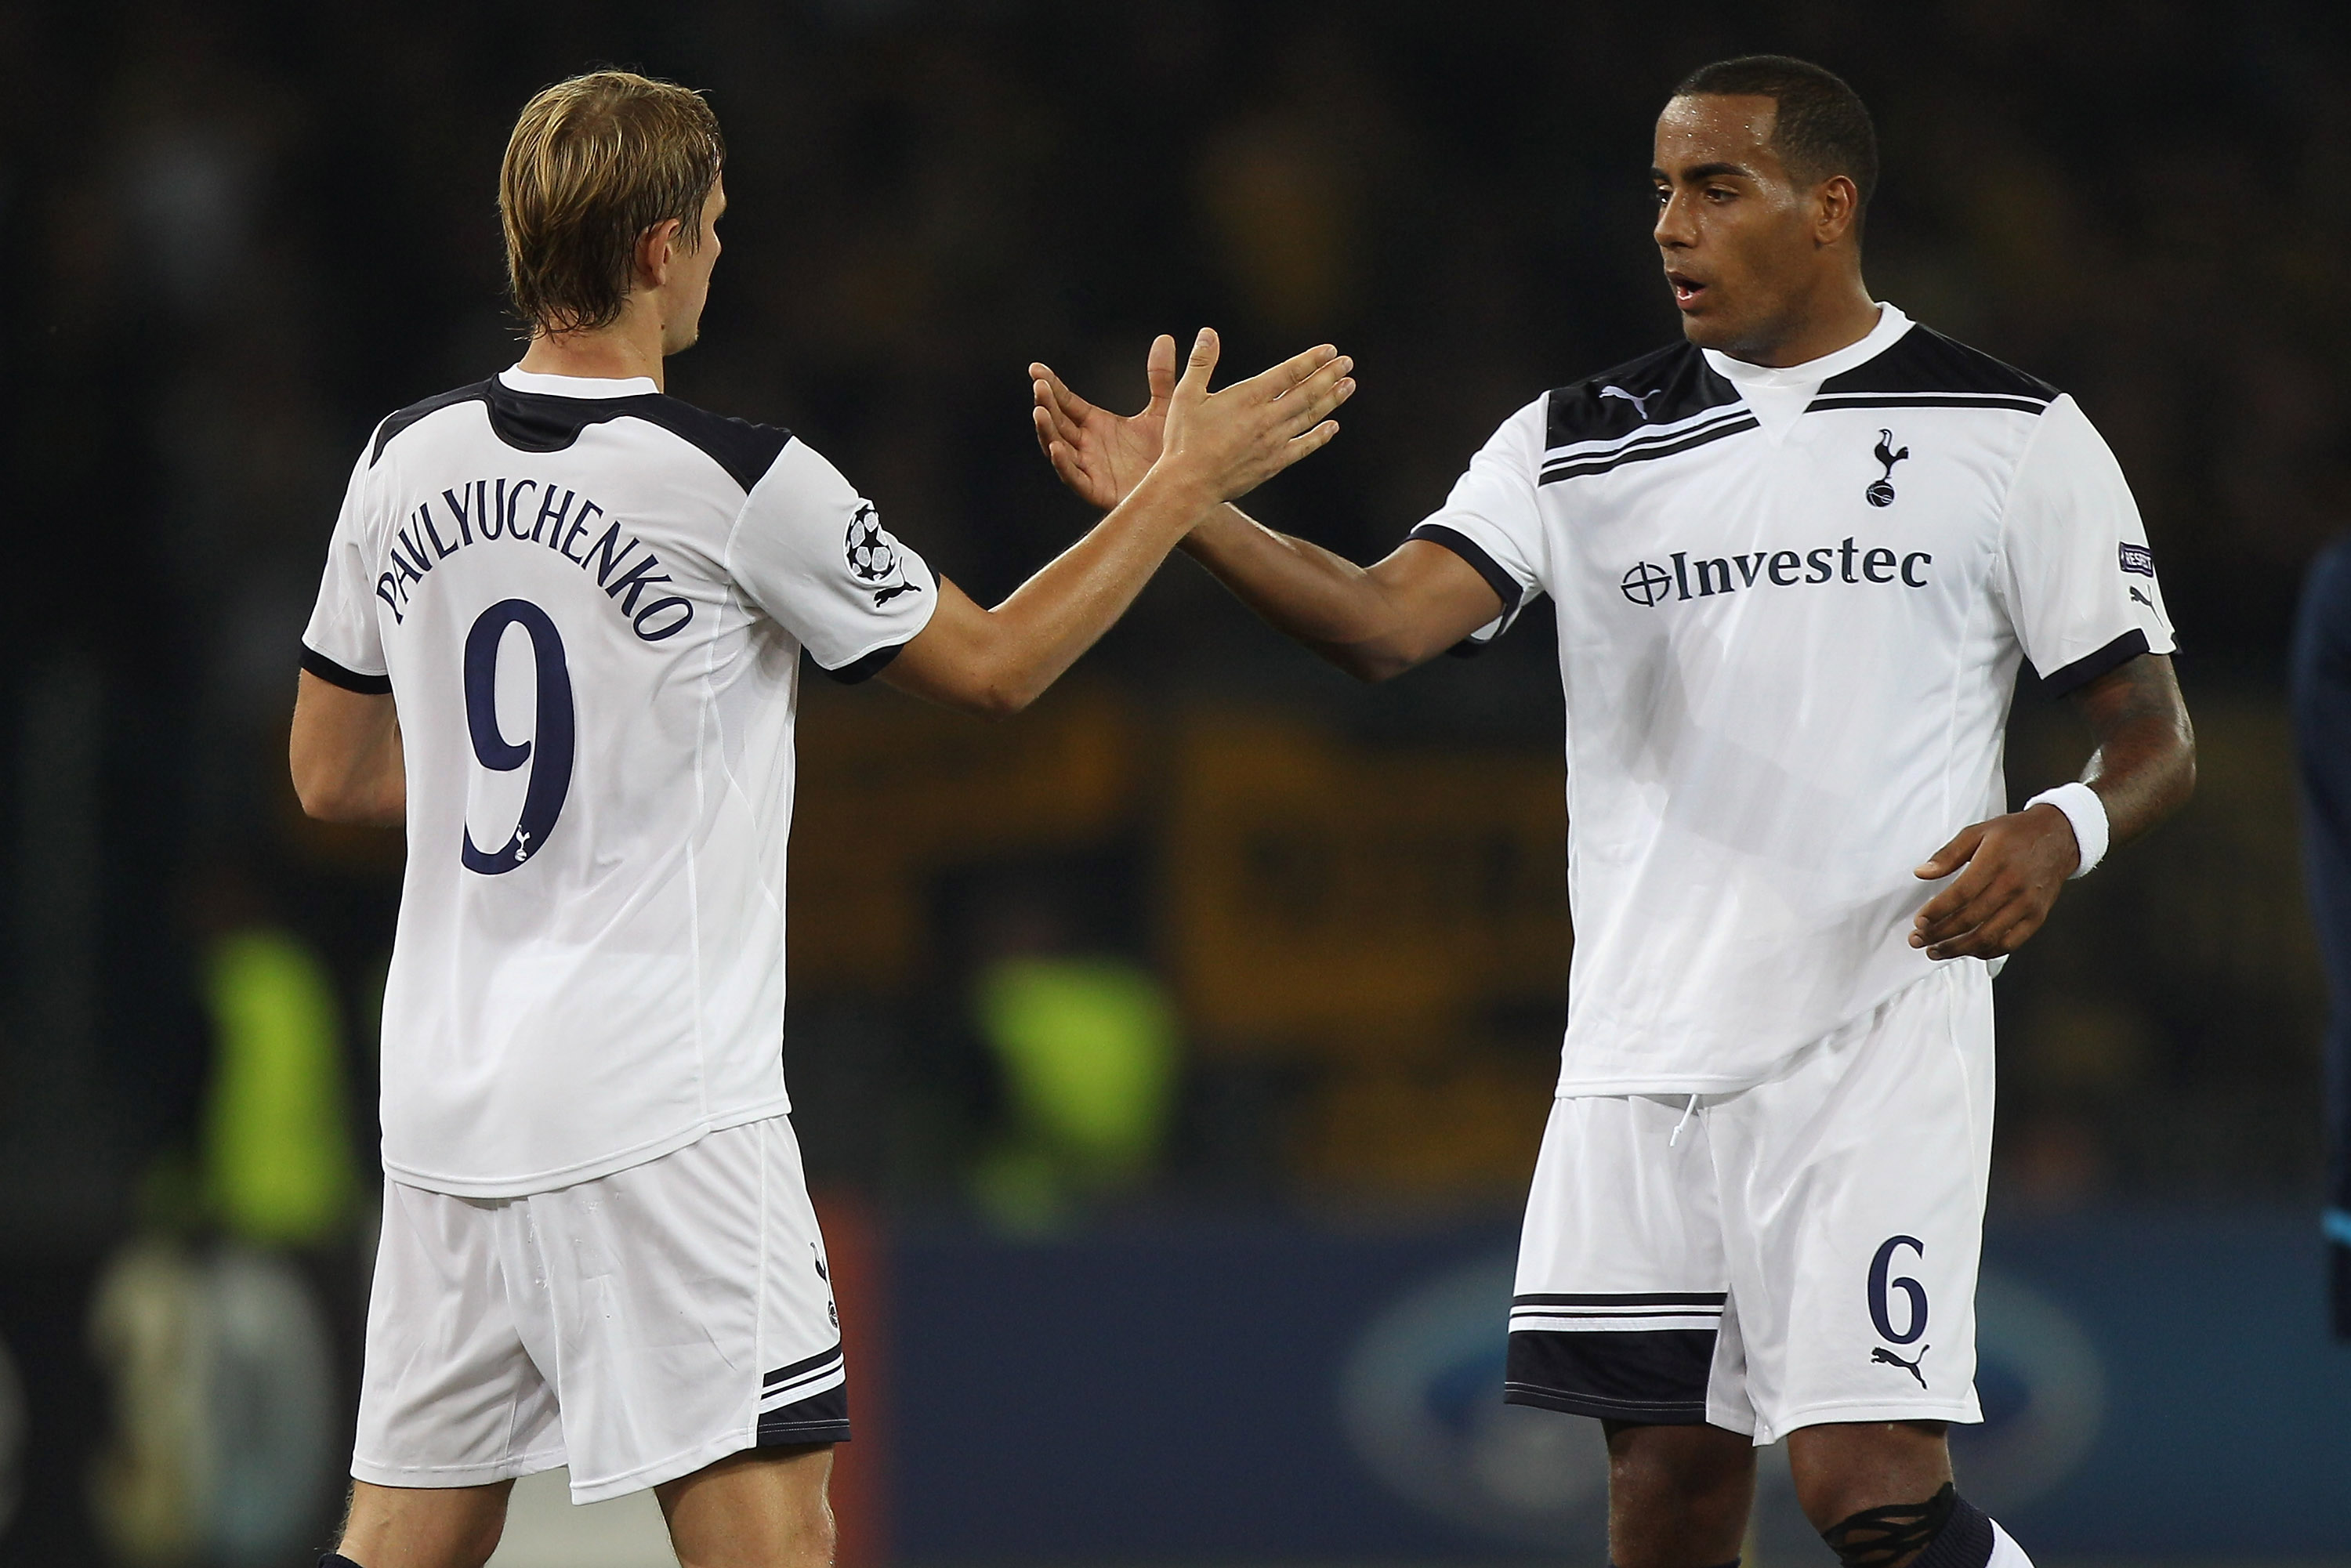 BERNE, SWITZERLAND - AUGUST 17:  Roman Pavlyuchenko (l) of Tottenham shakes hands with Tom Huddlestone (r) after the final whistle during the UEFA Champions League Play-Off first leg match between BSC Young Boys and Tottenham Hotspur at the Stade de Suiss